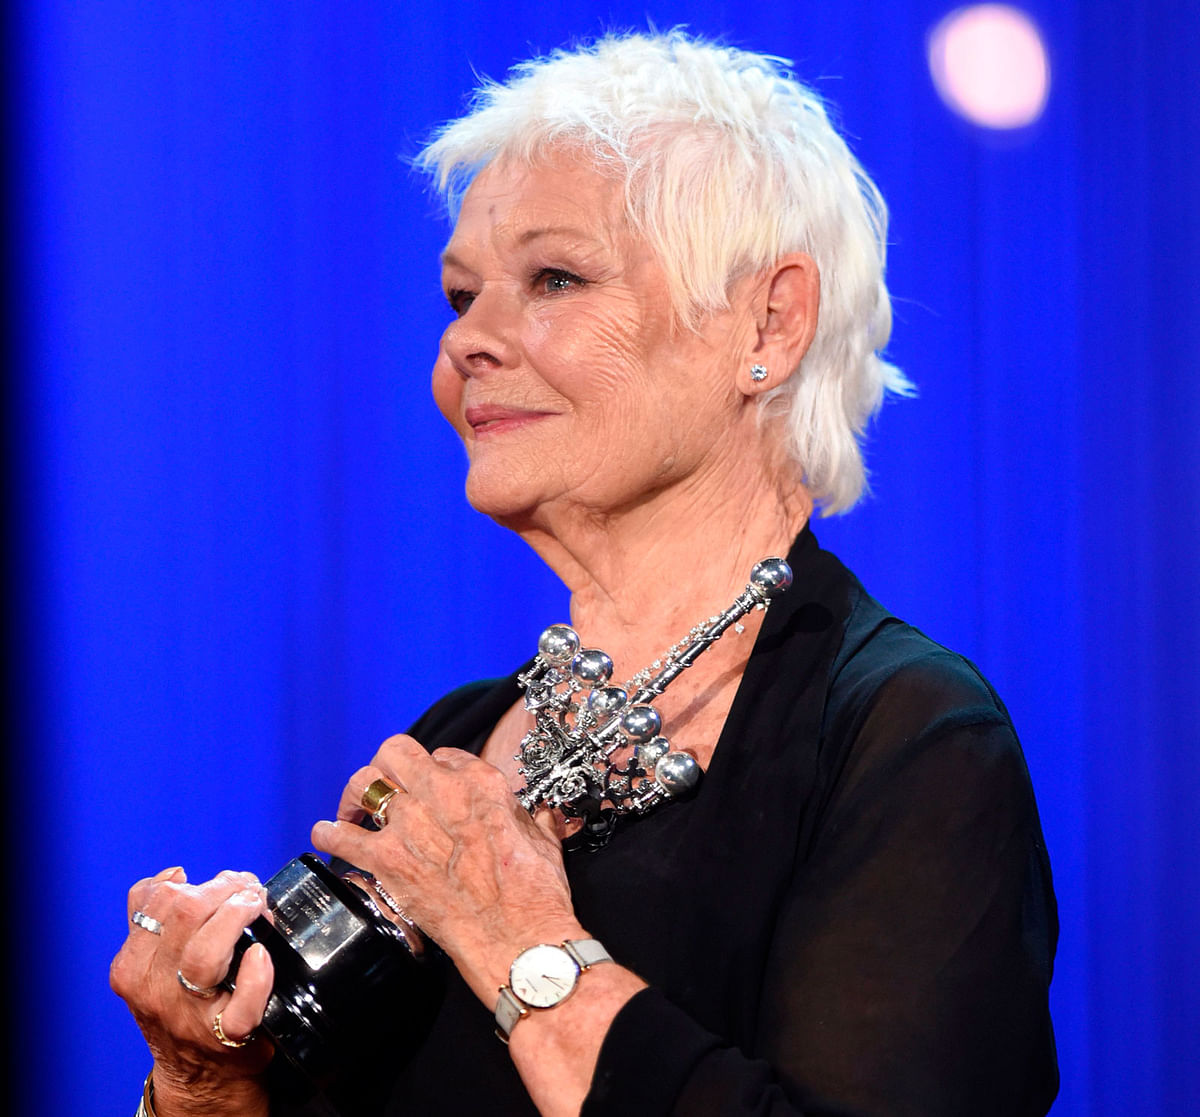 British screen legend Judi Dench was honoured Tuesday with a lifetime achievement award at Spain’s famous San Sebastian film festival  Caption: British actress Judi Dench receives the Donostia award during the 66th San Sebastian Film Festival, in the northern Spanish Basque city of San Sebastian on 25 September. Photo: AFP